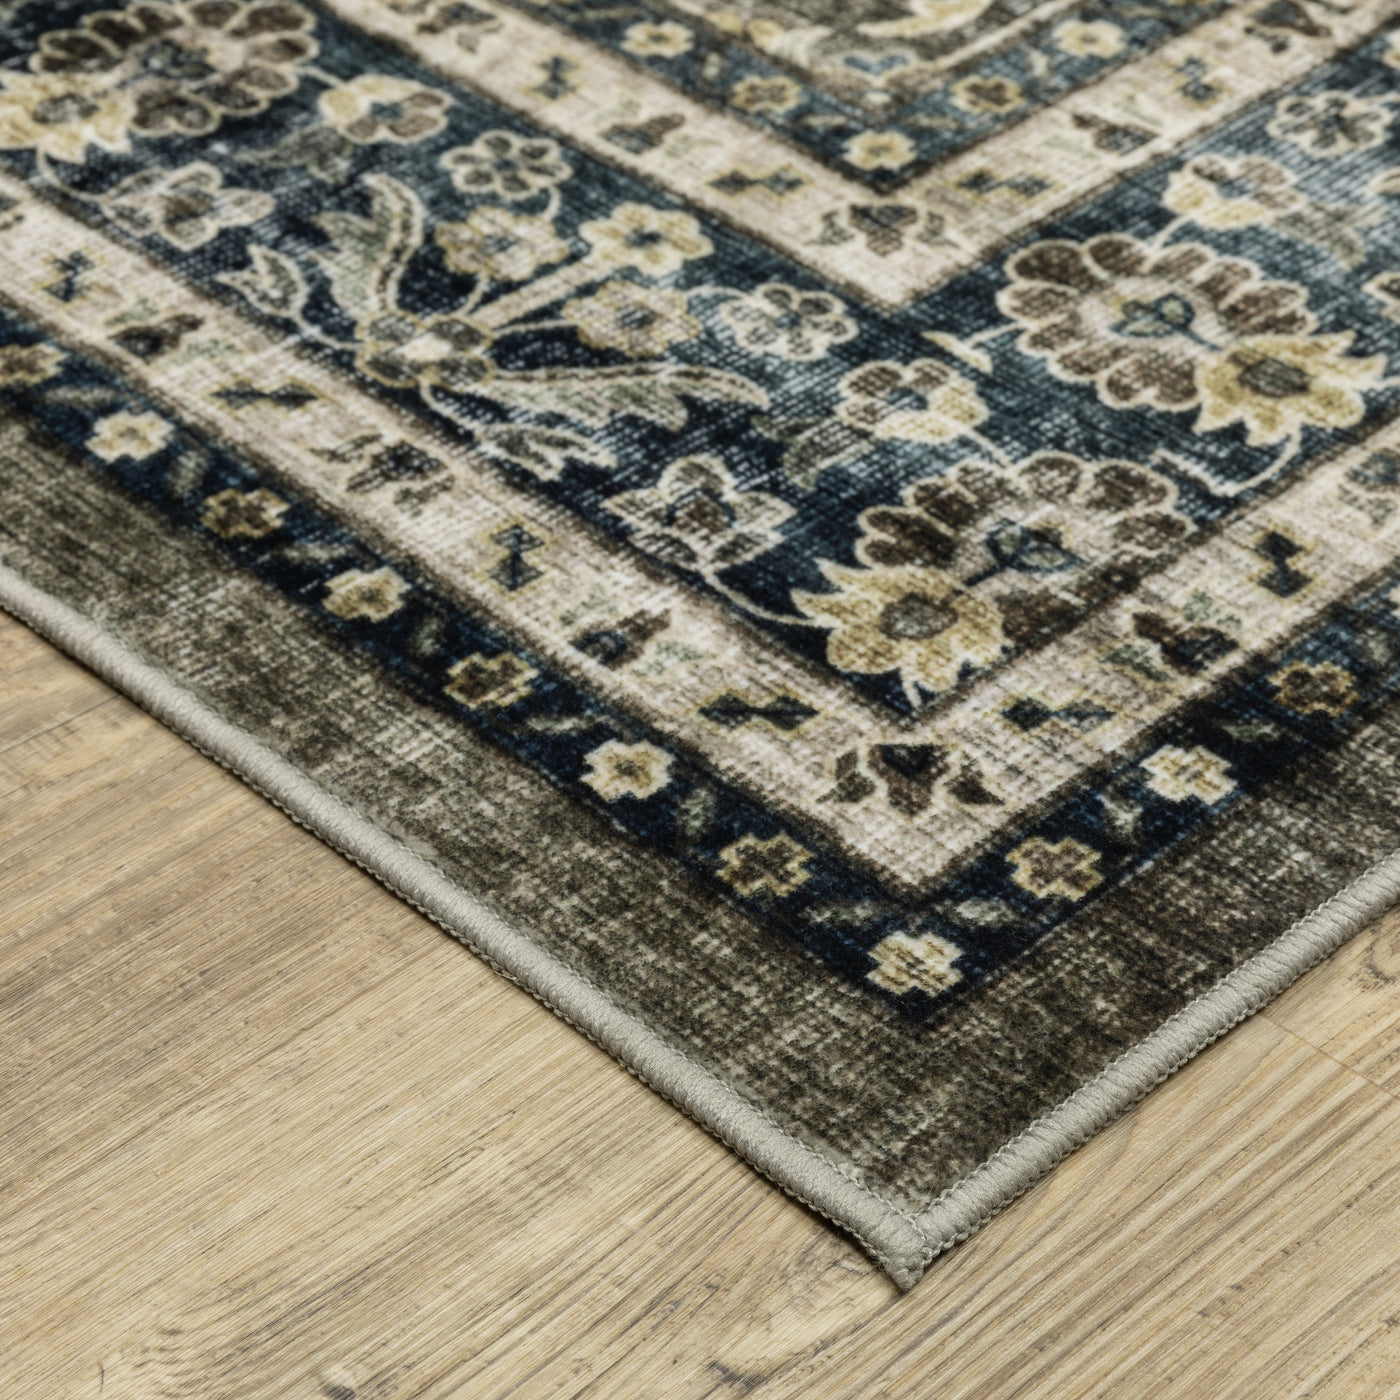 Buy Sumter sum06 Online at the Lowest Price | The Rug District Canada